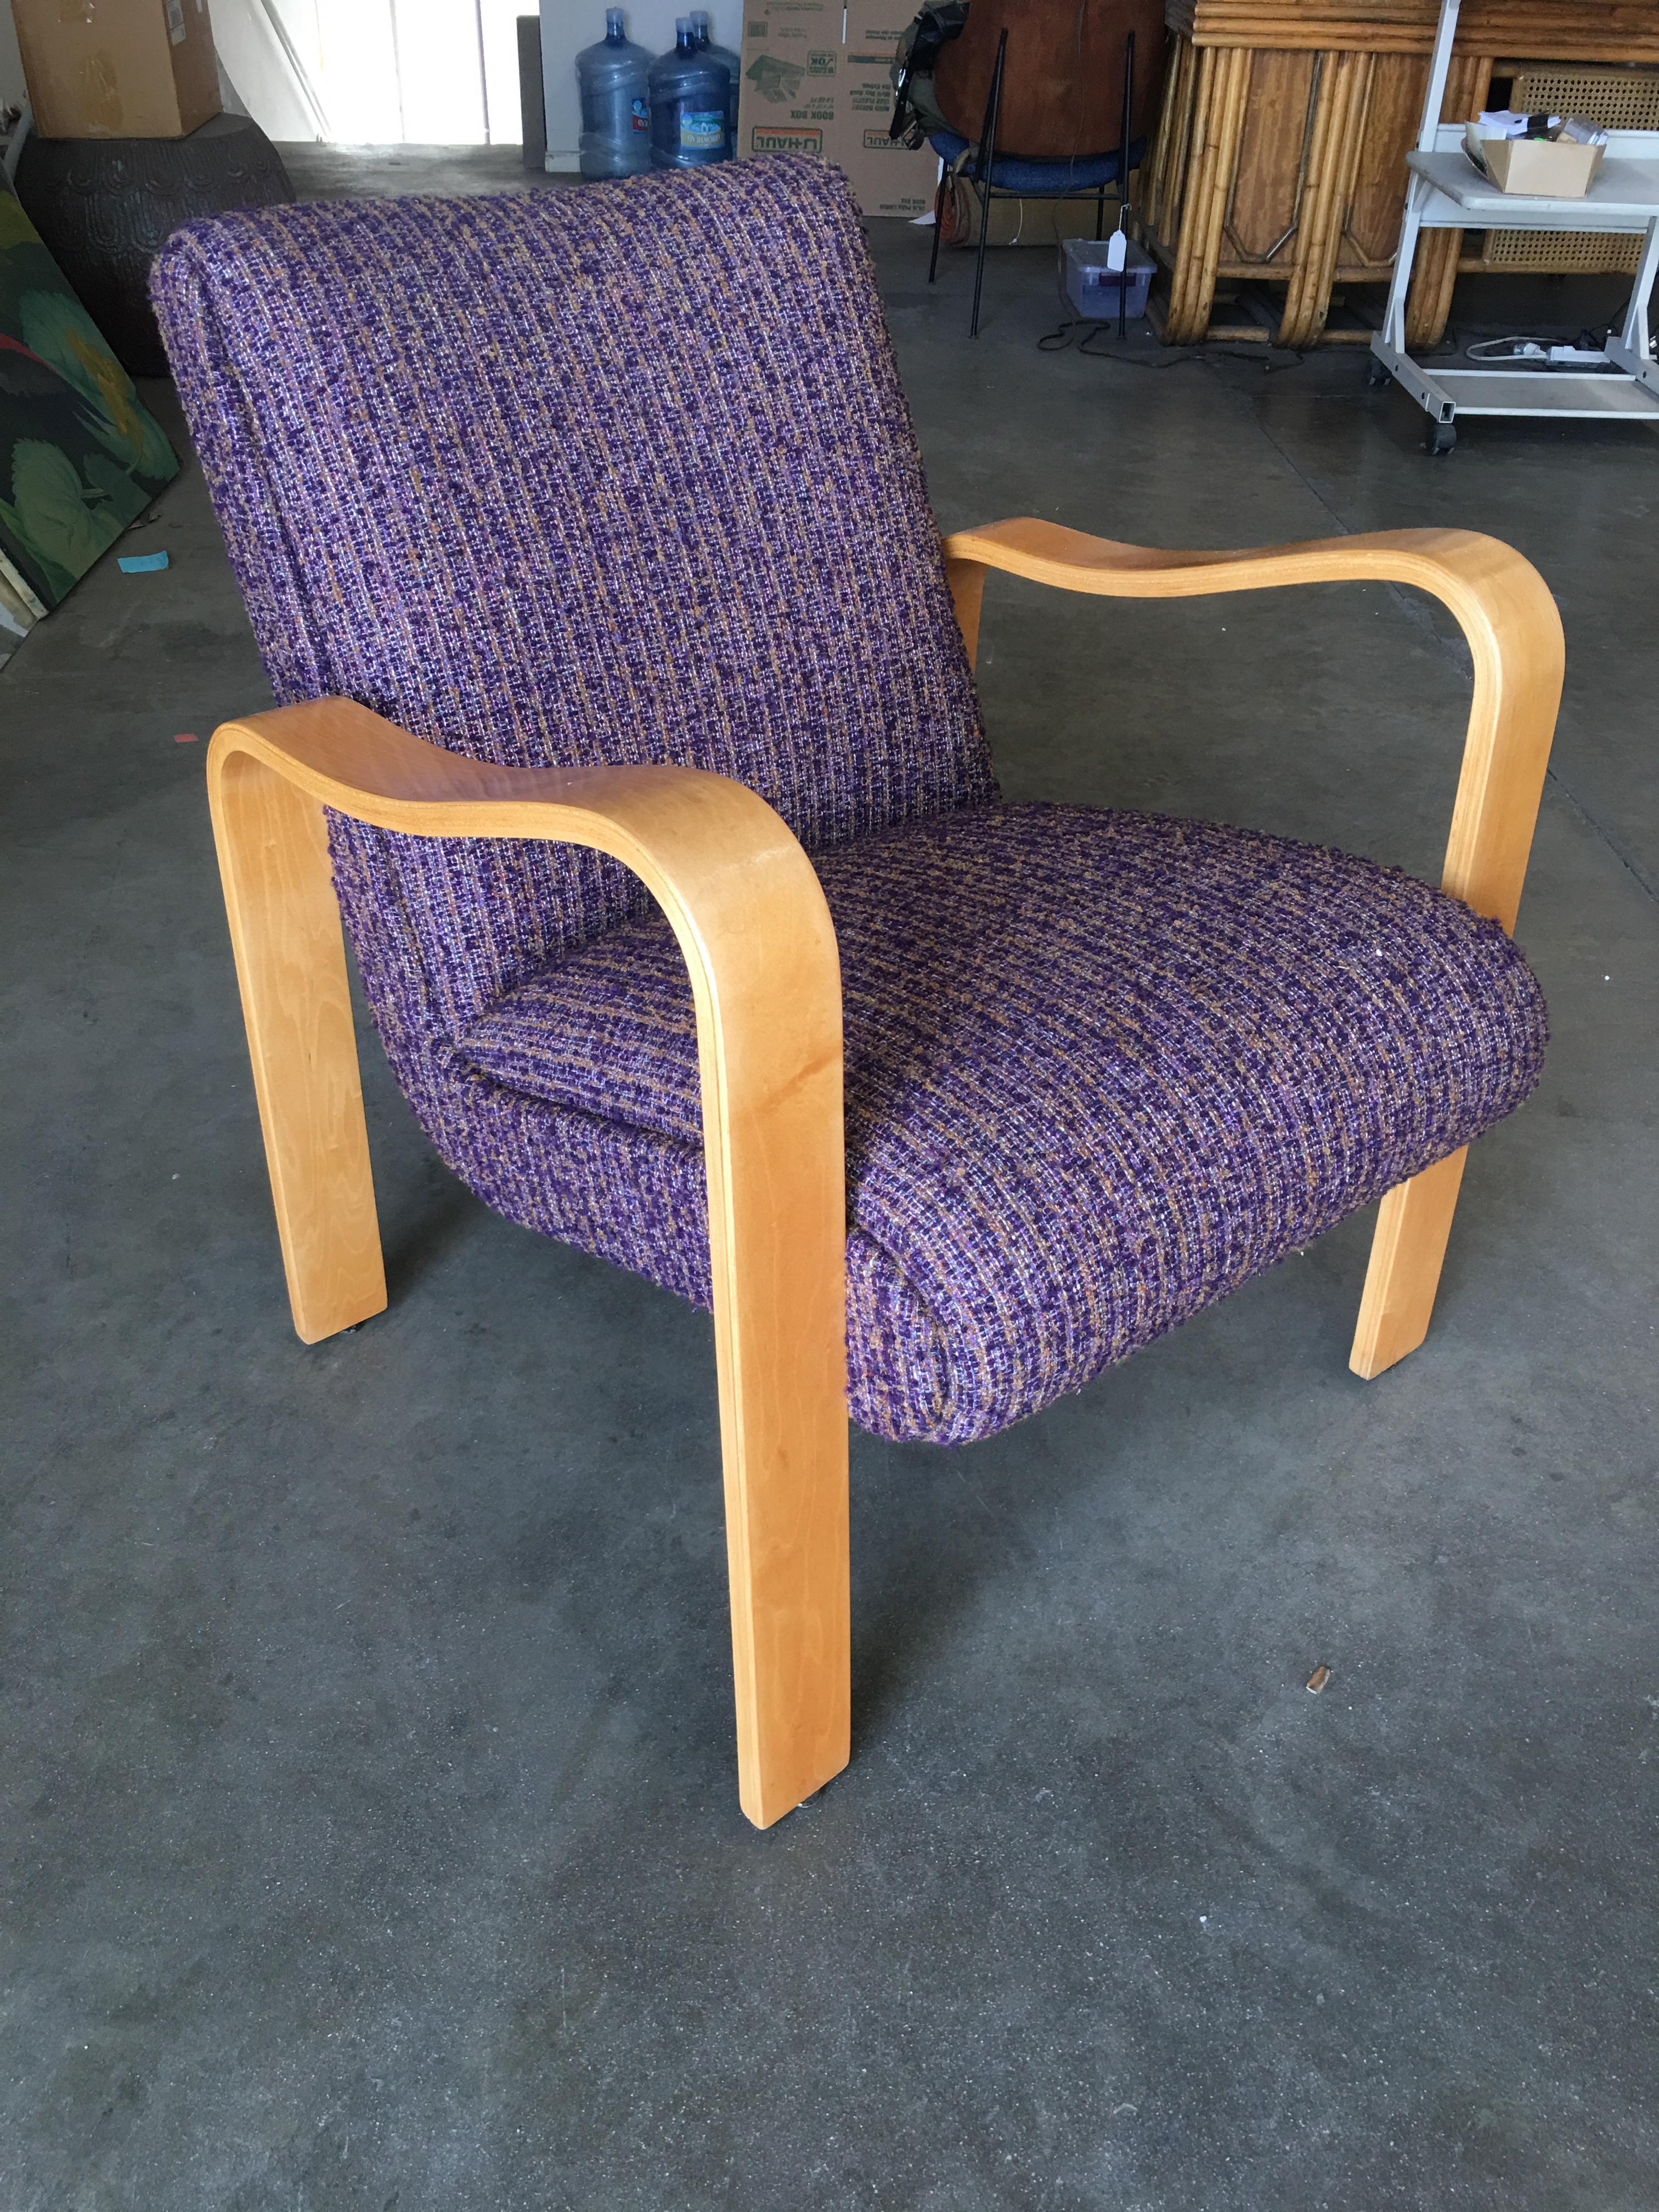 This elegant 1950s lounge chair by Thonet features undulating blond bentwood arms and continues seat. The chair has been professionally recovered in period Purple.